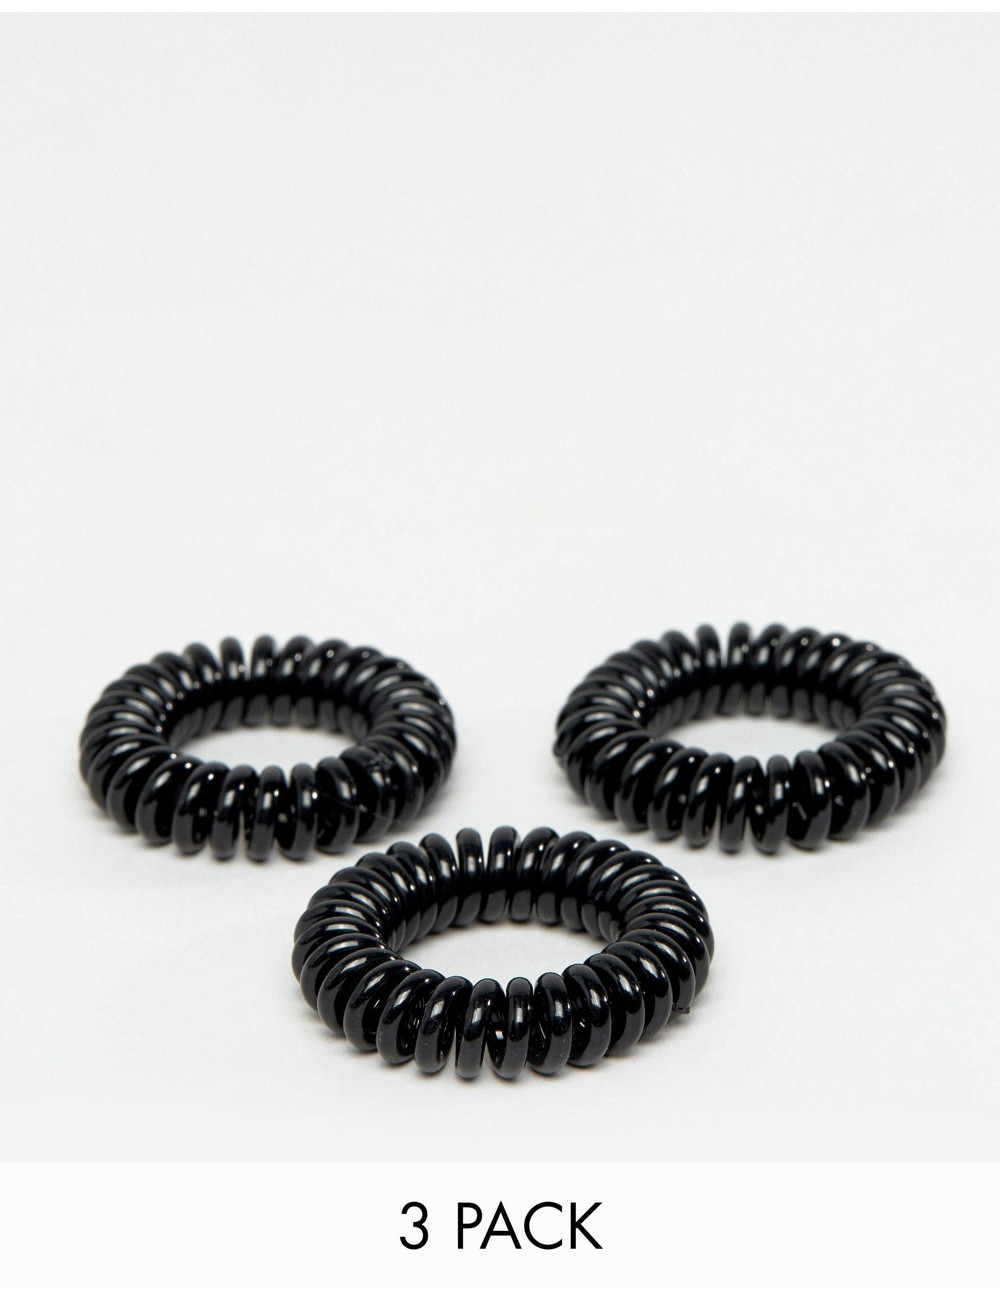 Invisibobble 3 pack Power...